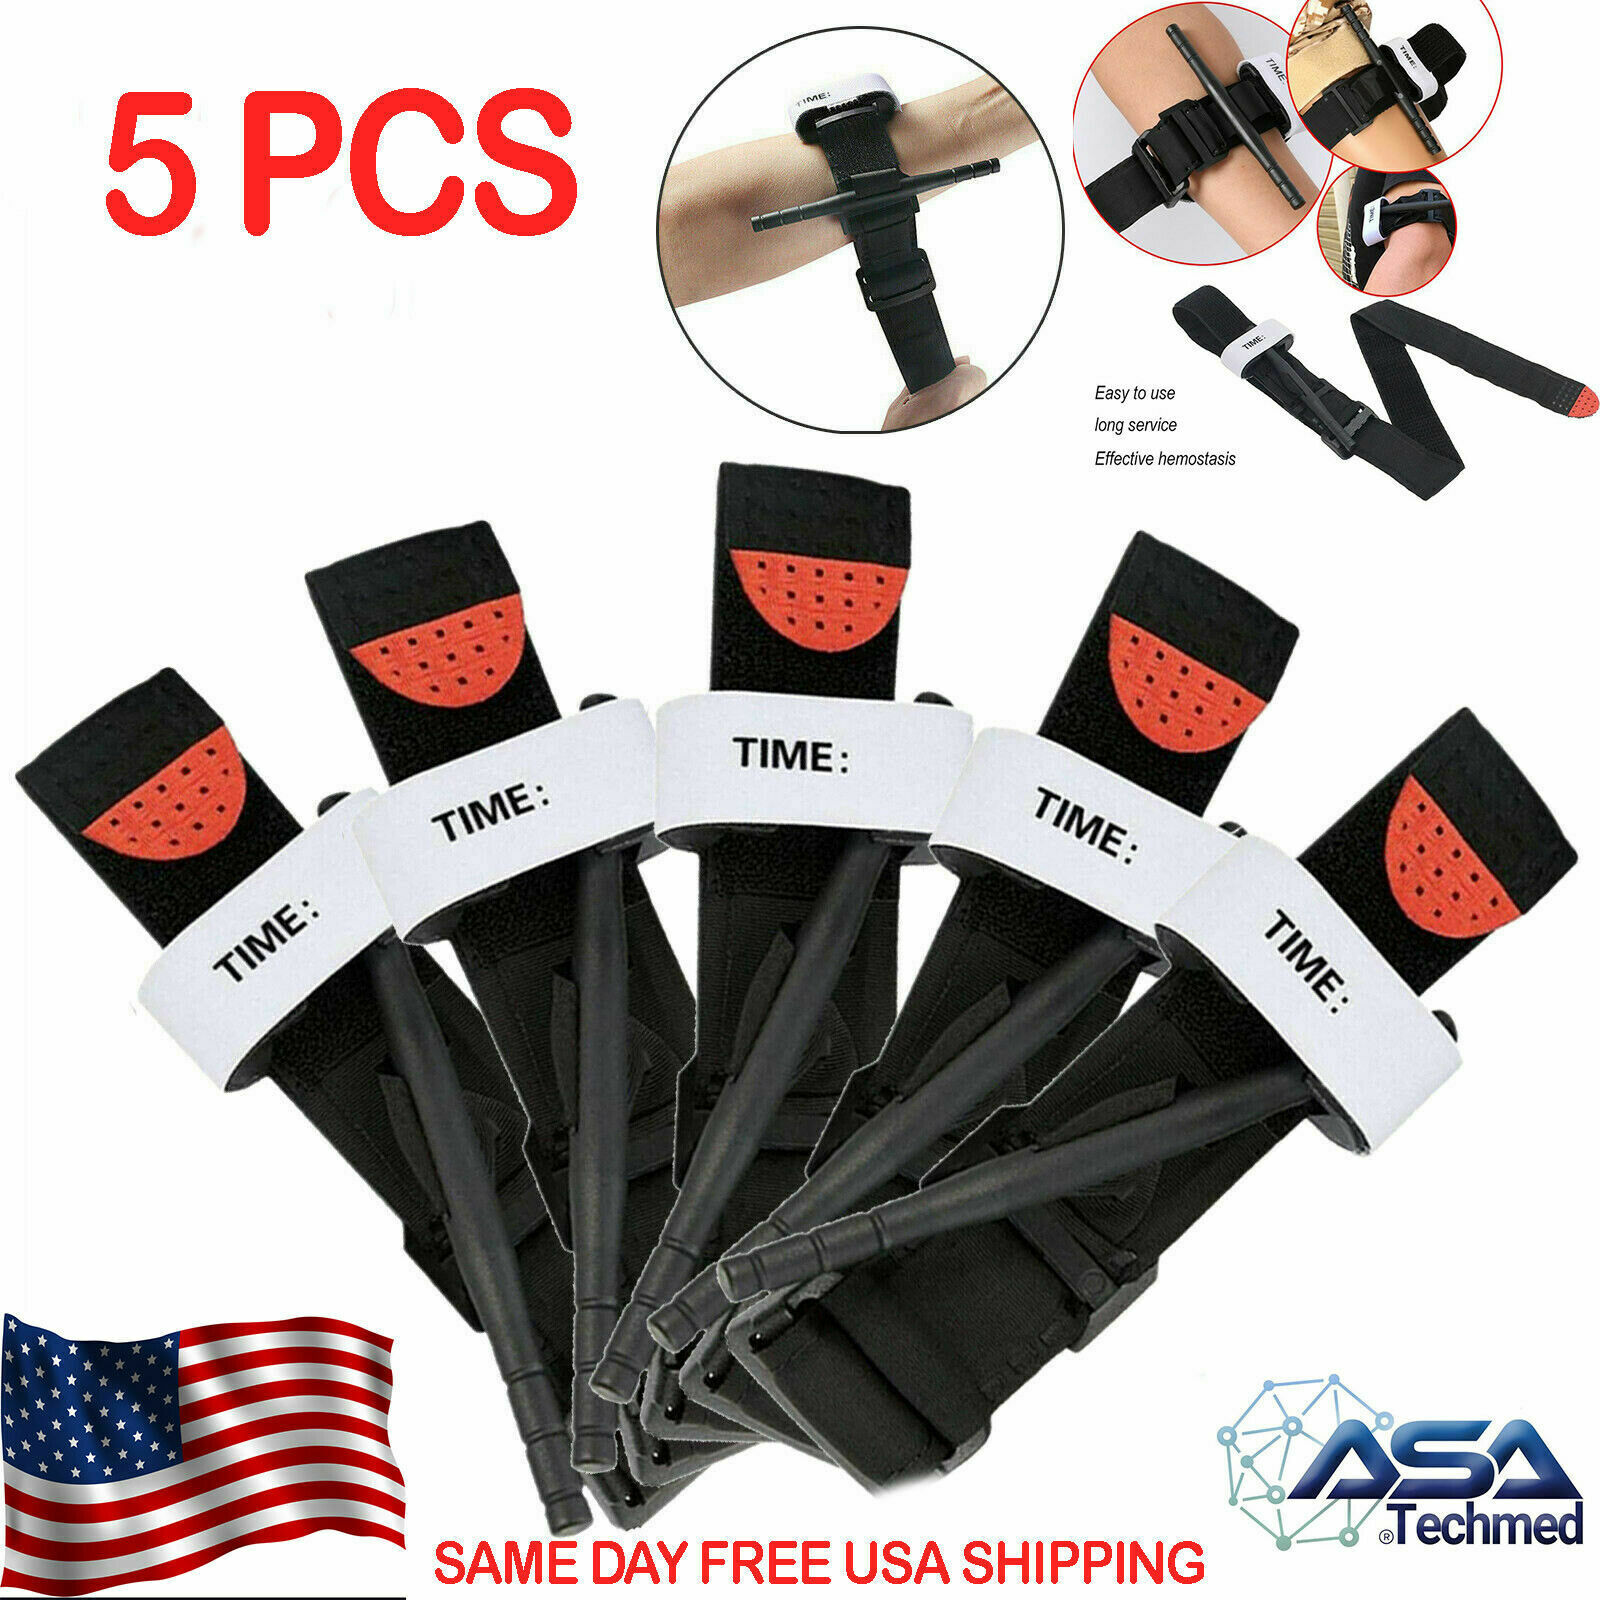 5 Pack Tourniquets With Rapid One Hand Application First Aid, Survival & Hiking